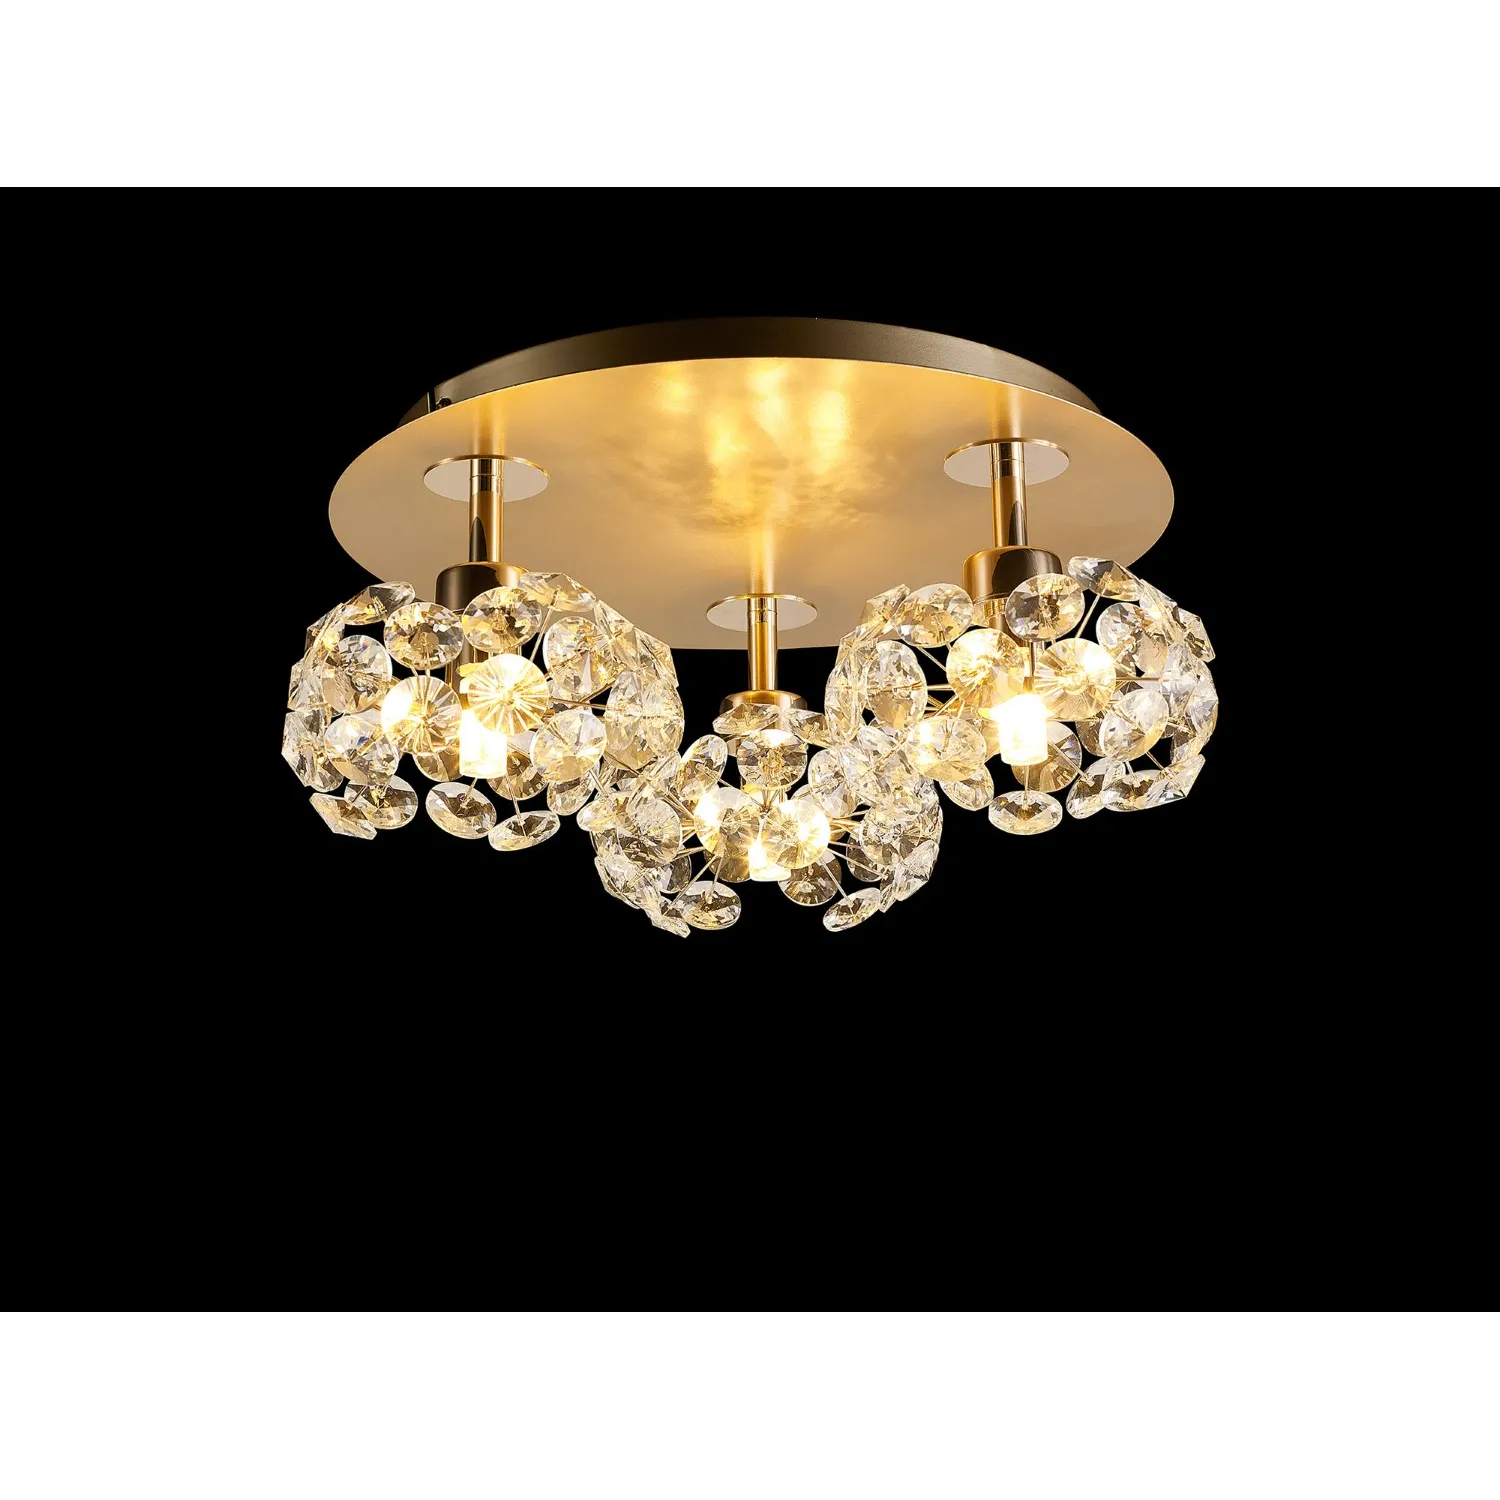 Camden Round 3 Light G9 35cm Flush Light With French Gold And Crystal Shade